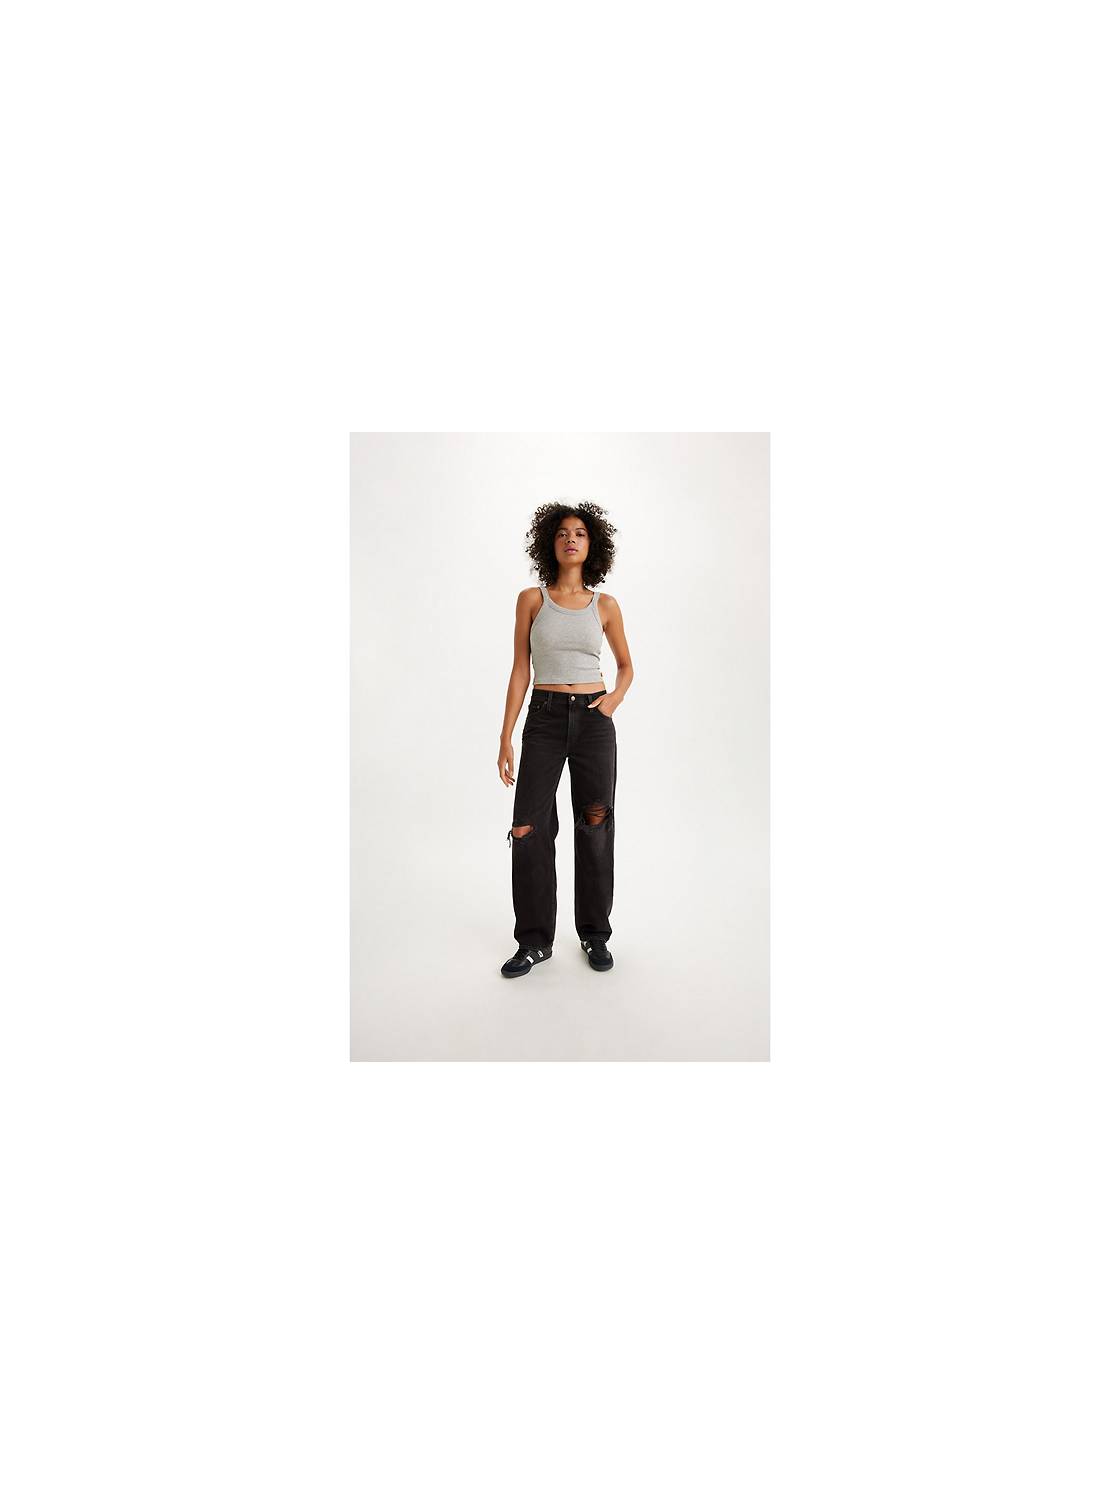 fvwitlyh Pants for Women Wildflower Pants for Women Ripped Baggy